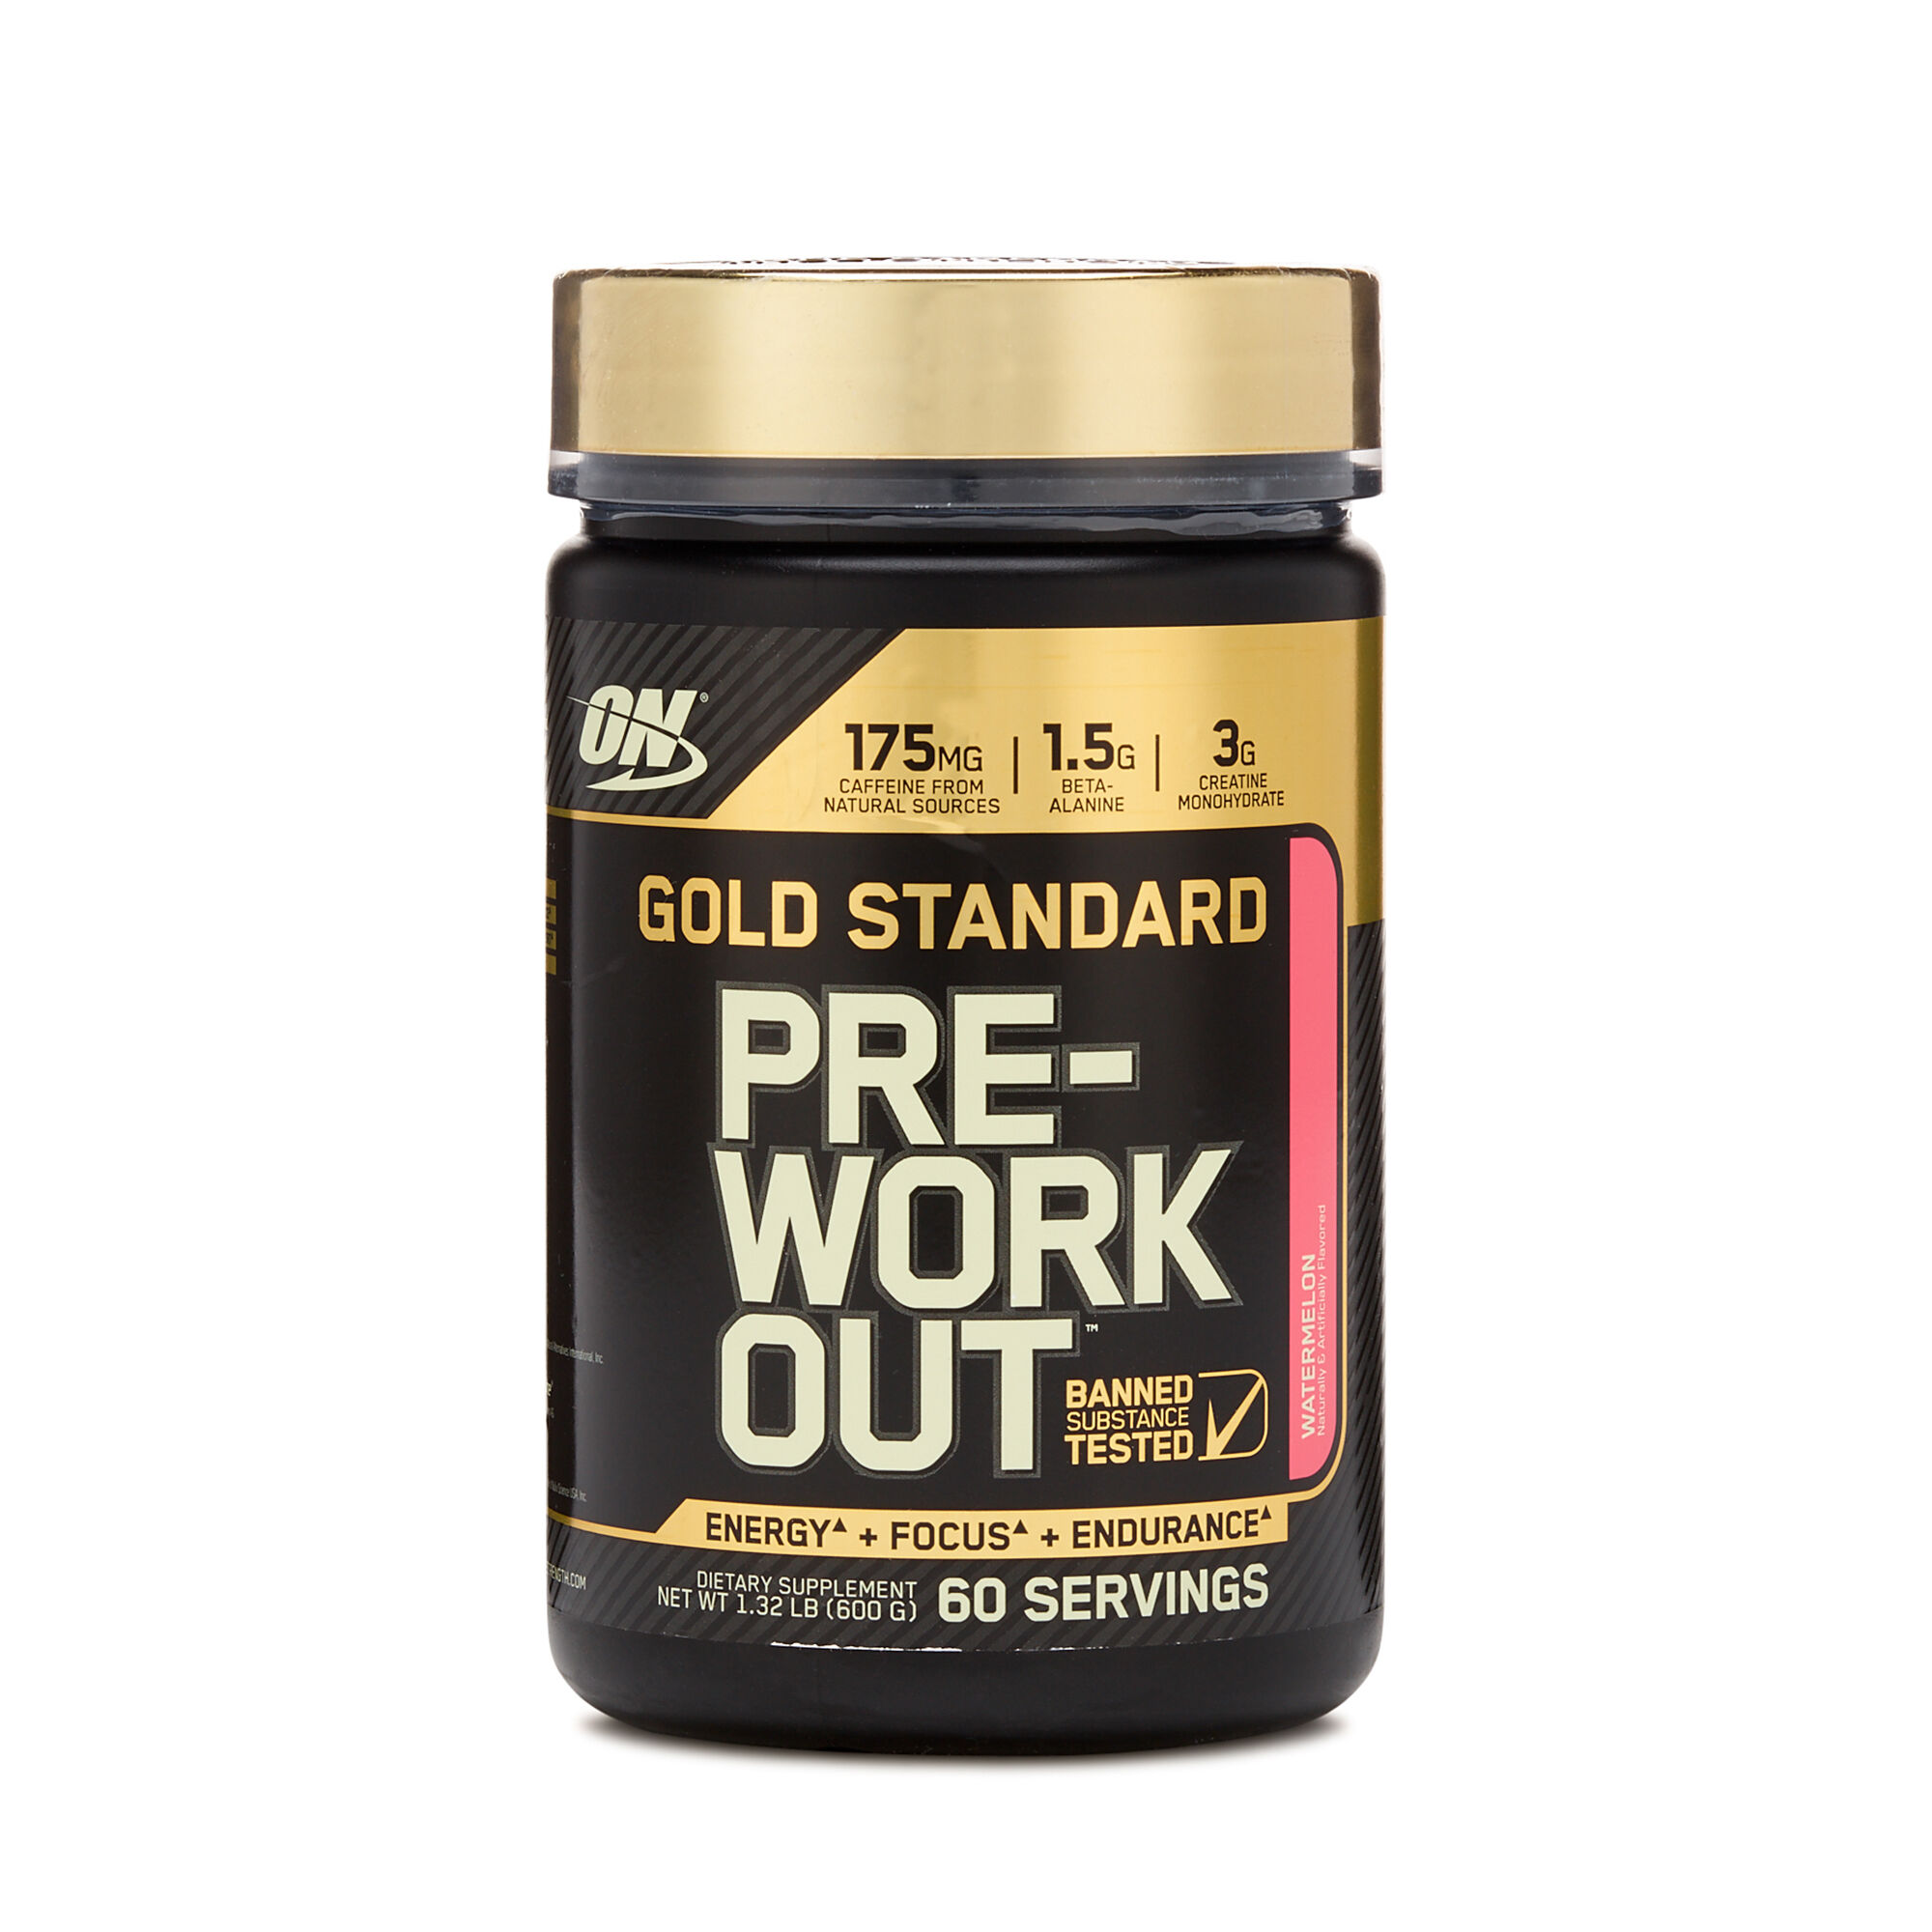 6 Day Power Switch Pre Workout Banned for Beginner